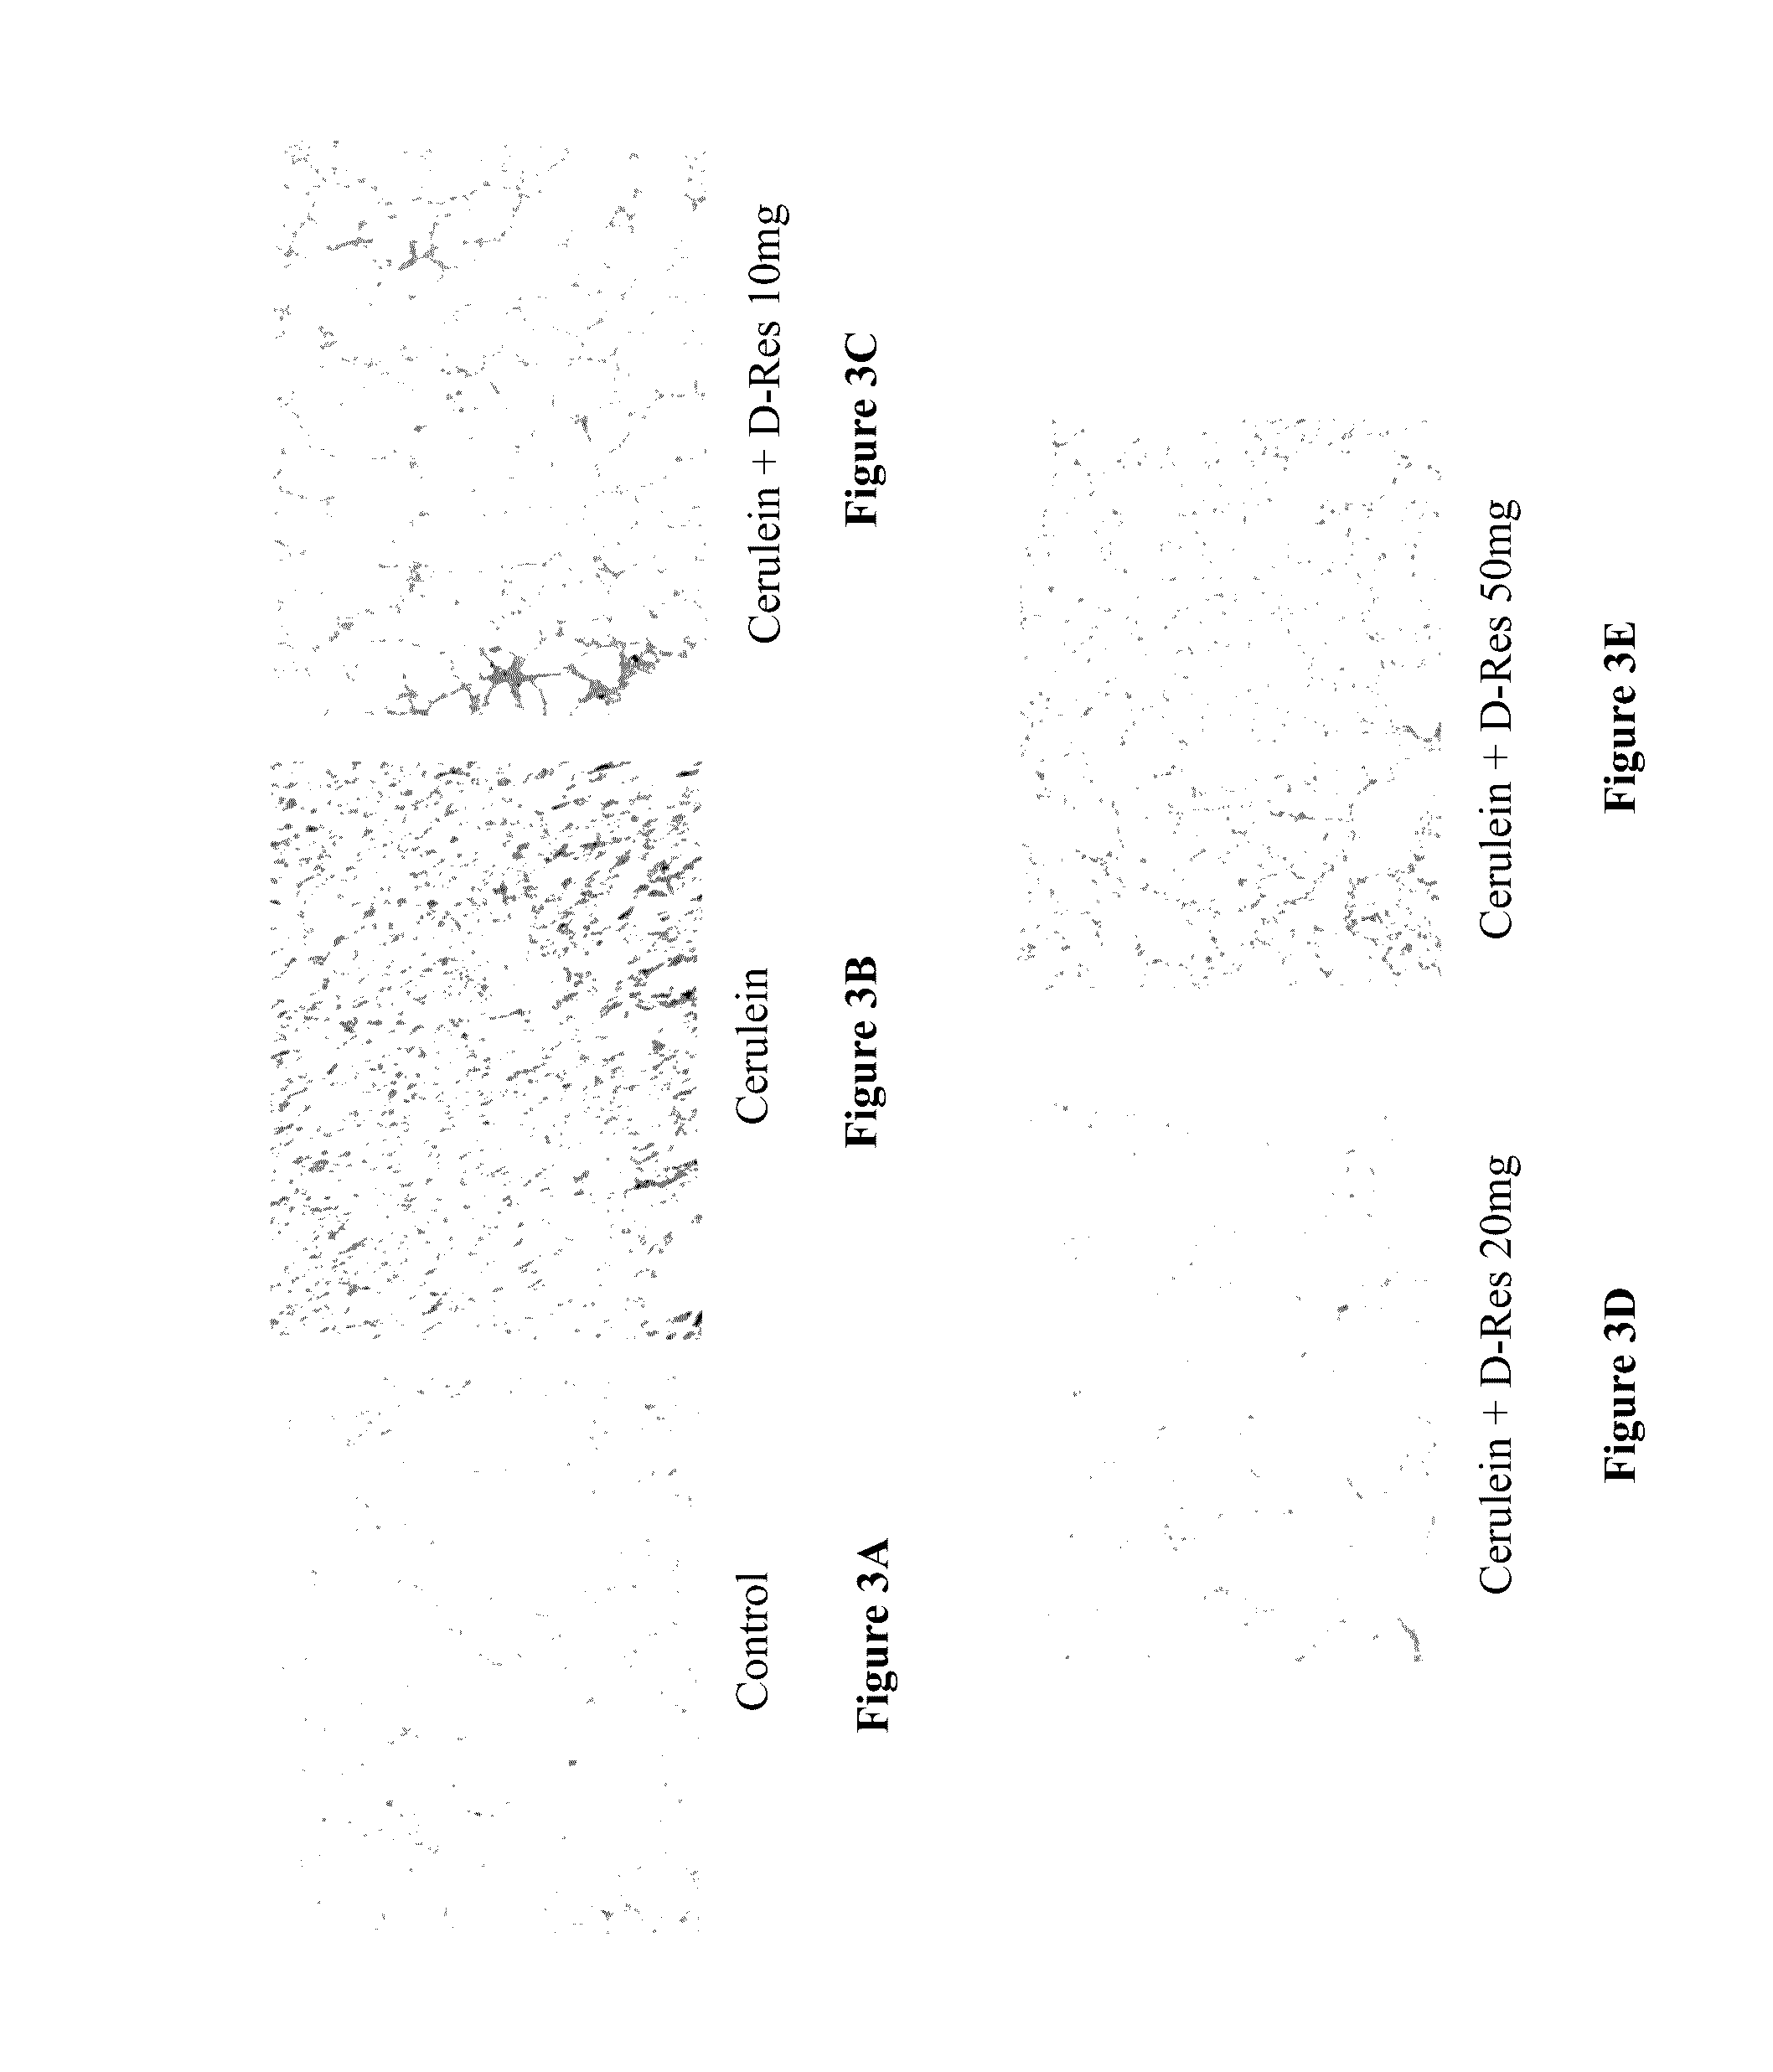 Skin-protection composition containing dendrobium-based ingredients